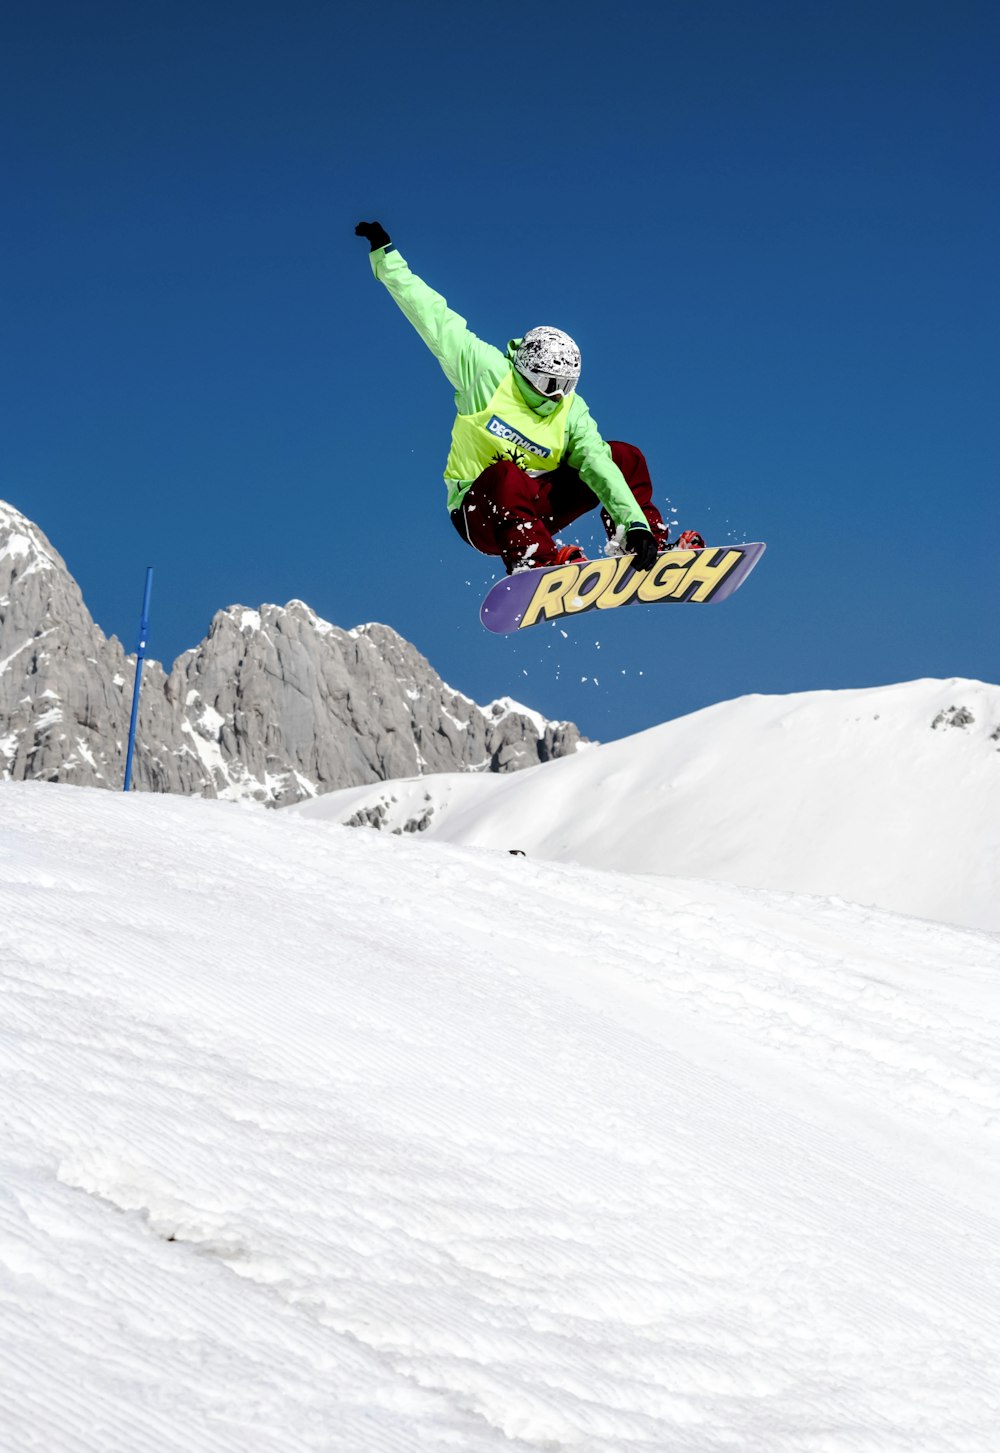 man in green jacket riding snowboard on snow covered mountain during daytime